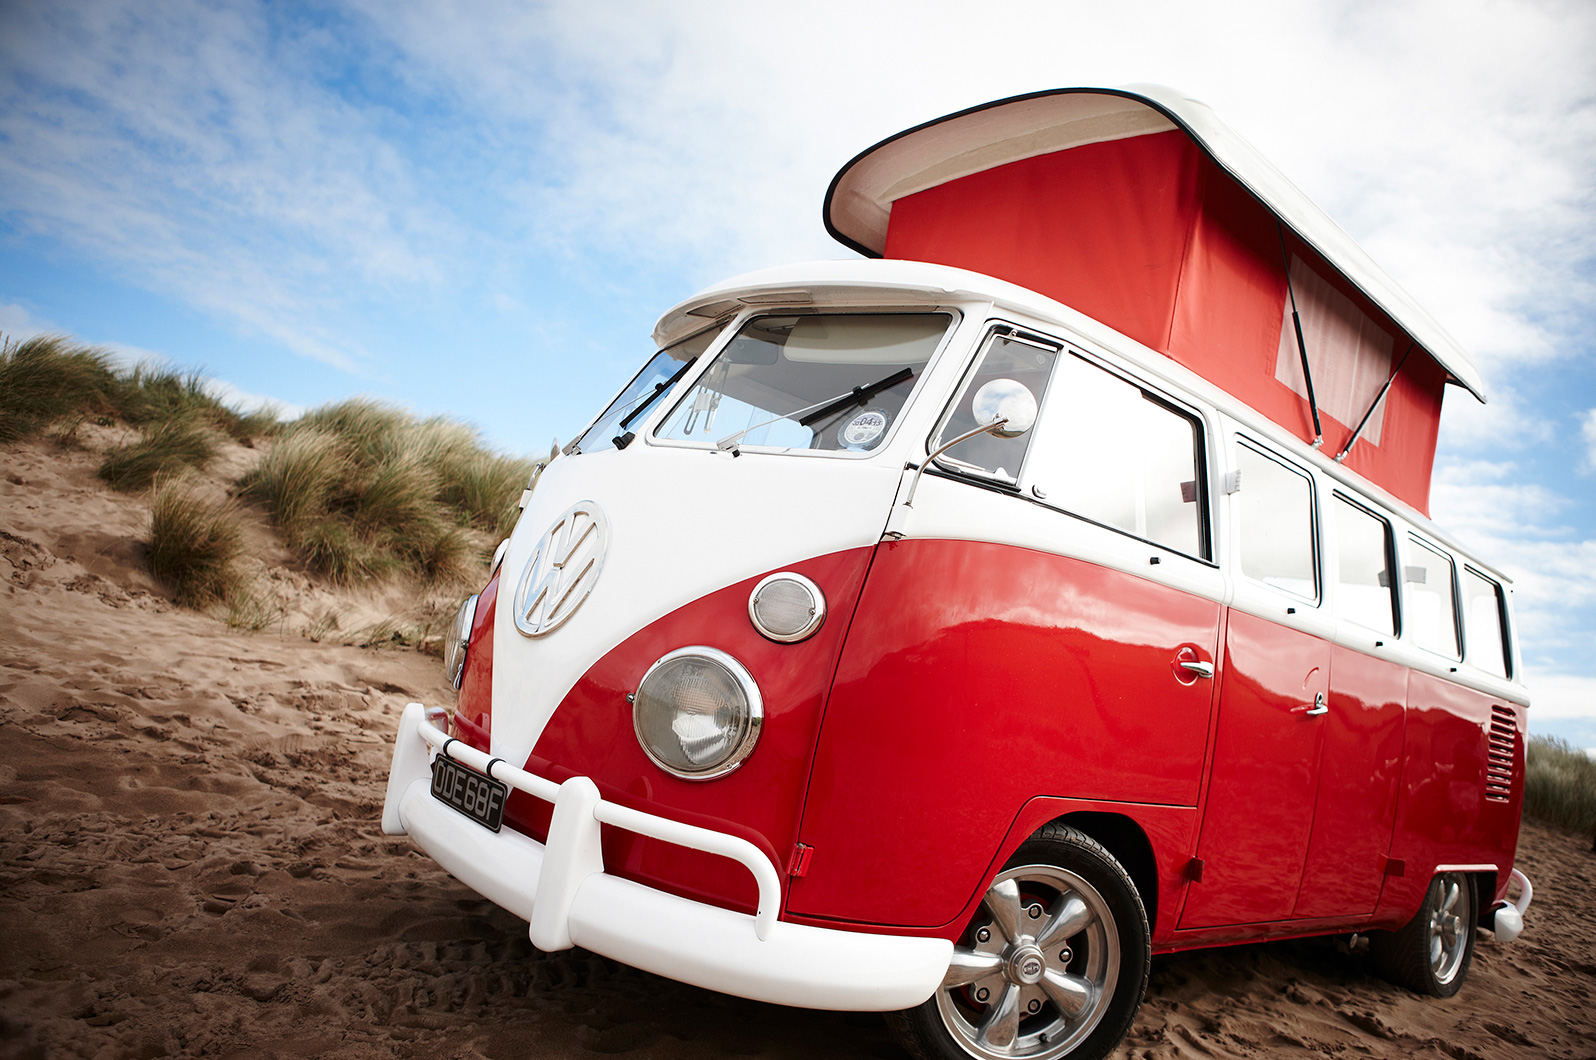 Image shot on Bantham Beach to highlight the quality of the camper roof construction.